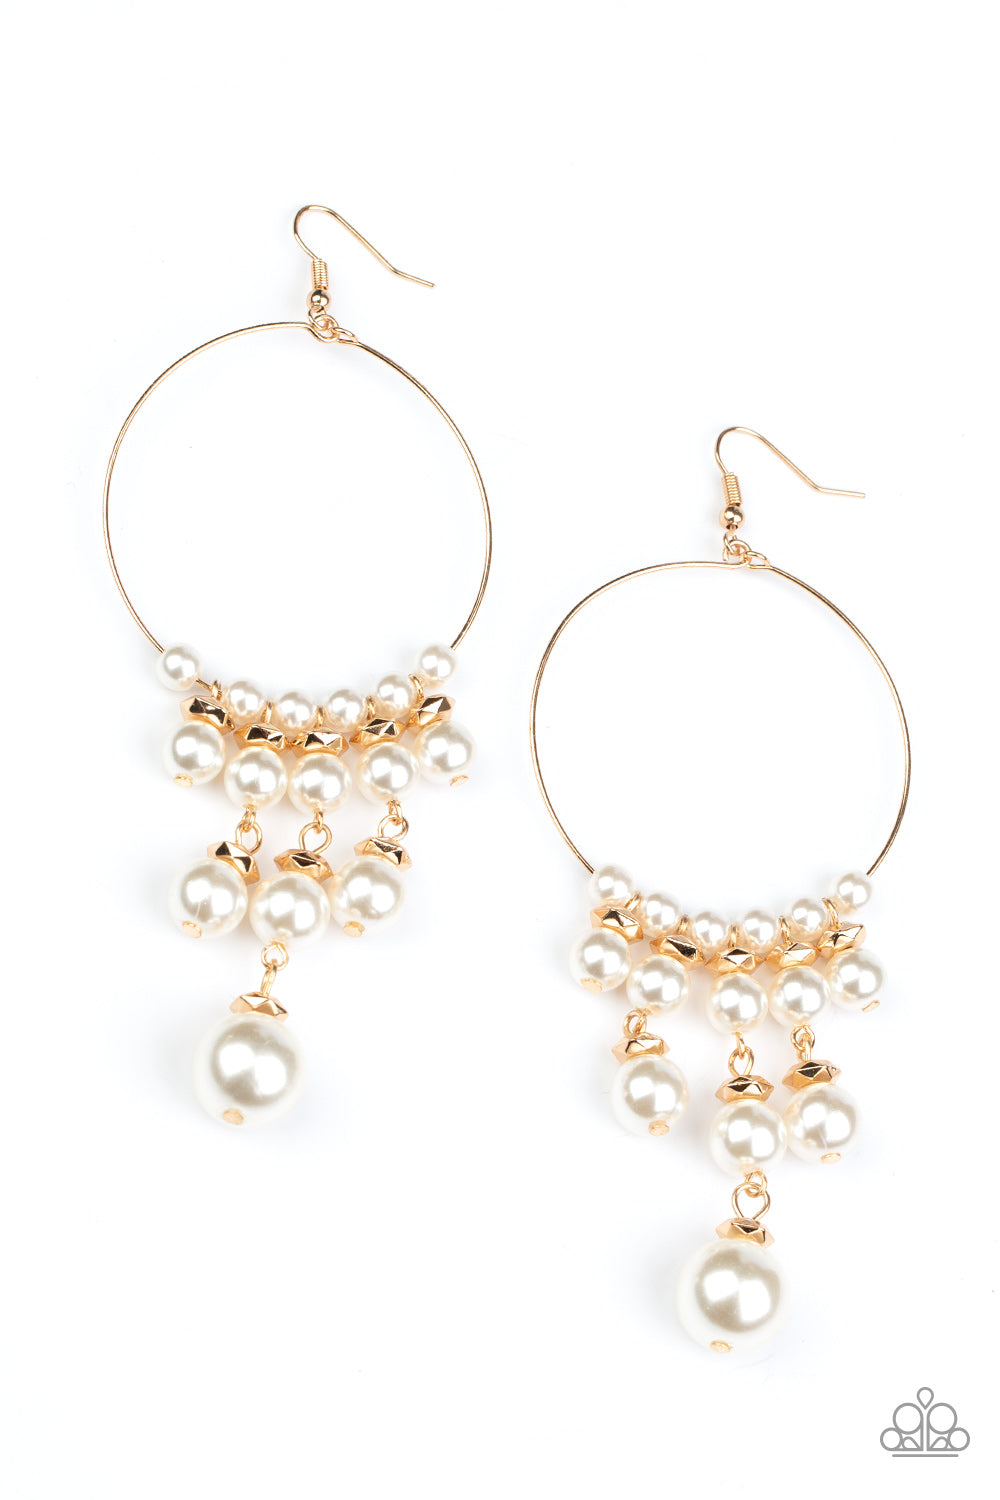 Paparazzi Accessories Working the Room - Gold Pearl Earrings  - Lady T Accessories